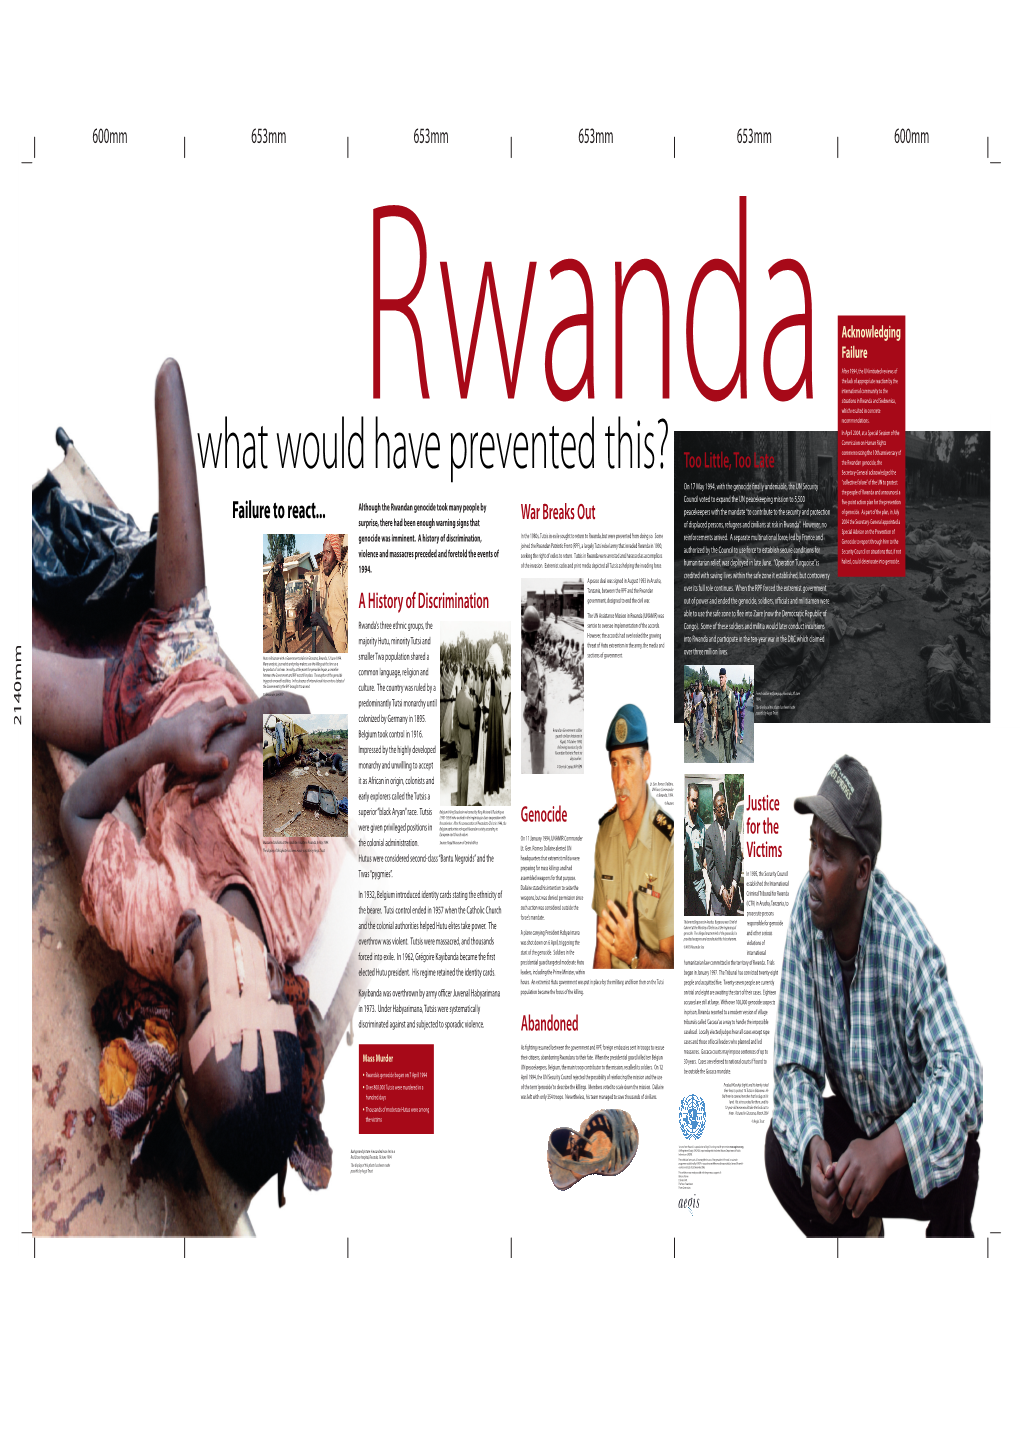 Rwanda International Community to the Situations in Rwanda and Srebrenica, Which Resulted in Concrete Recommendations